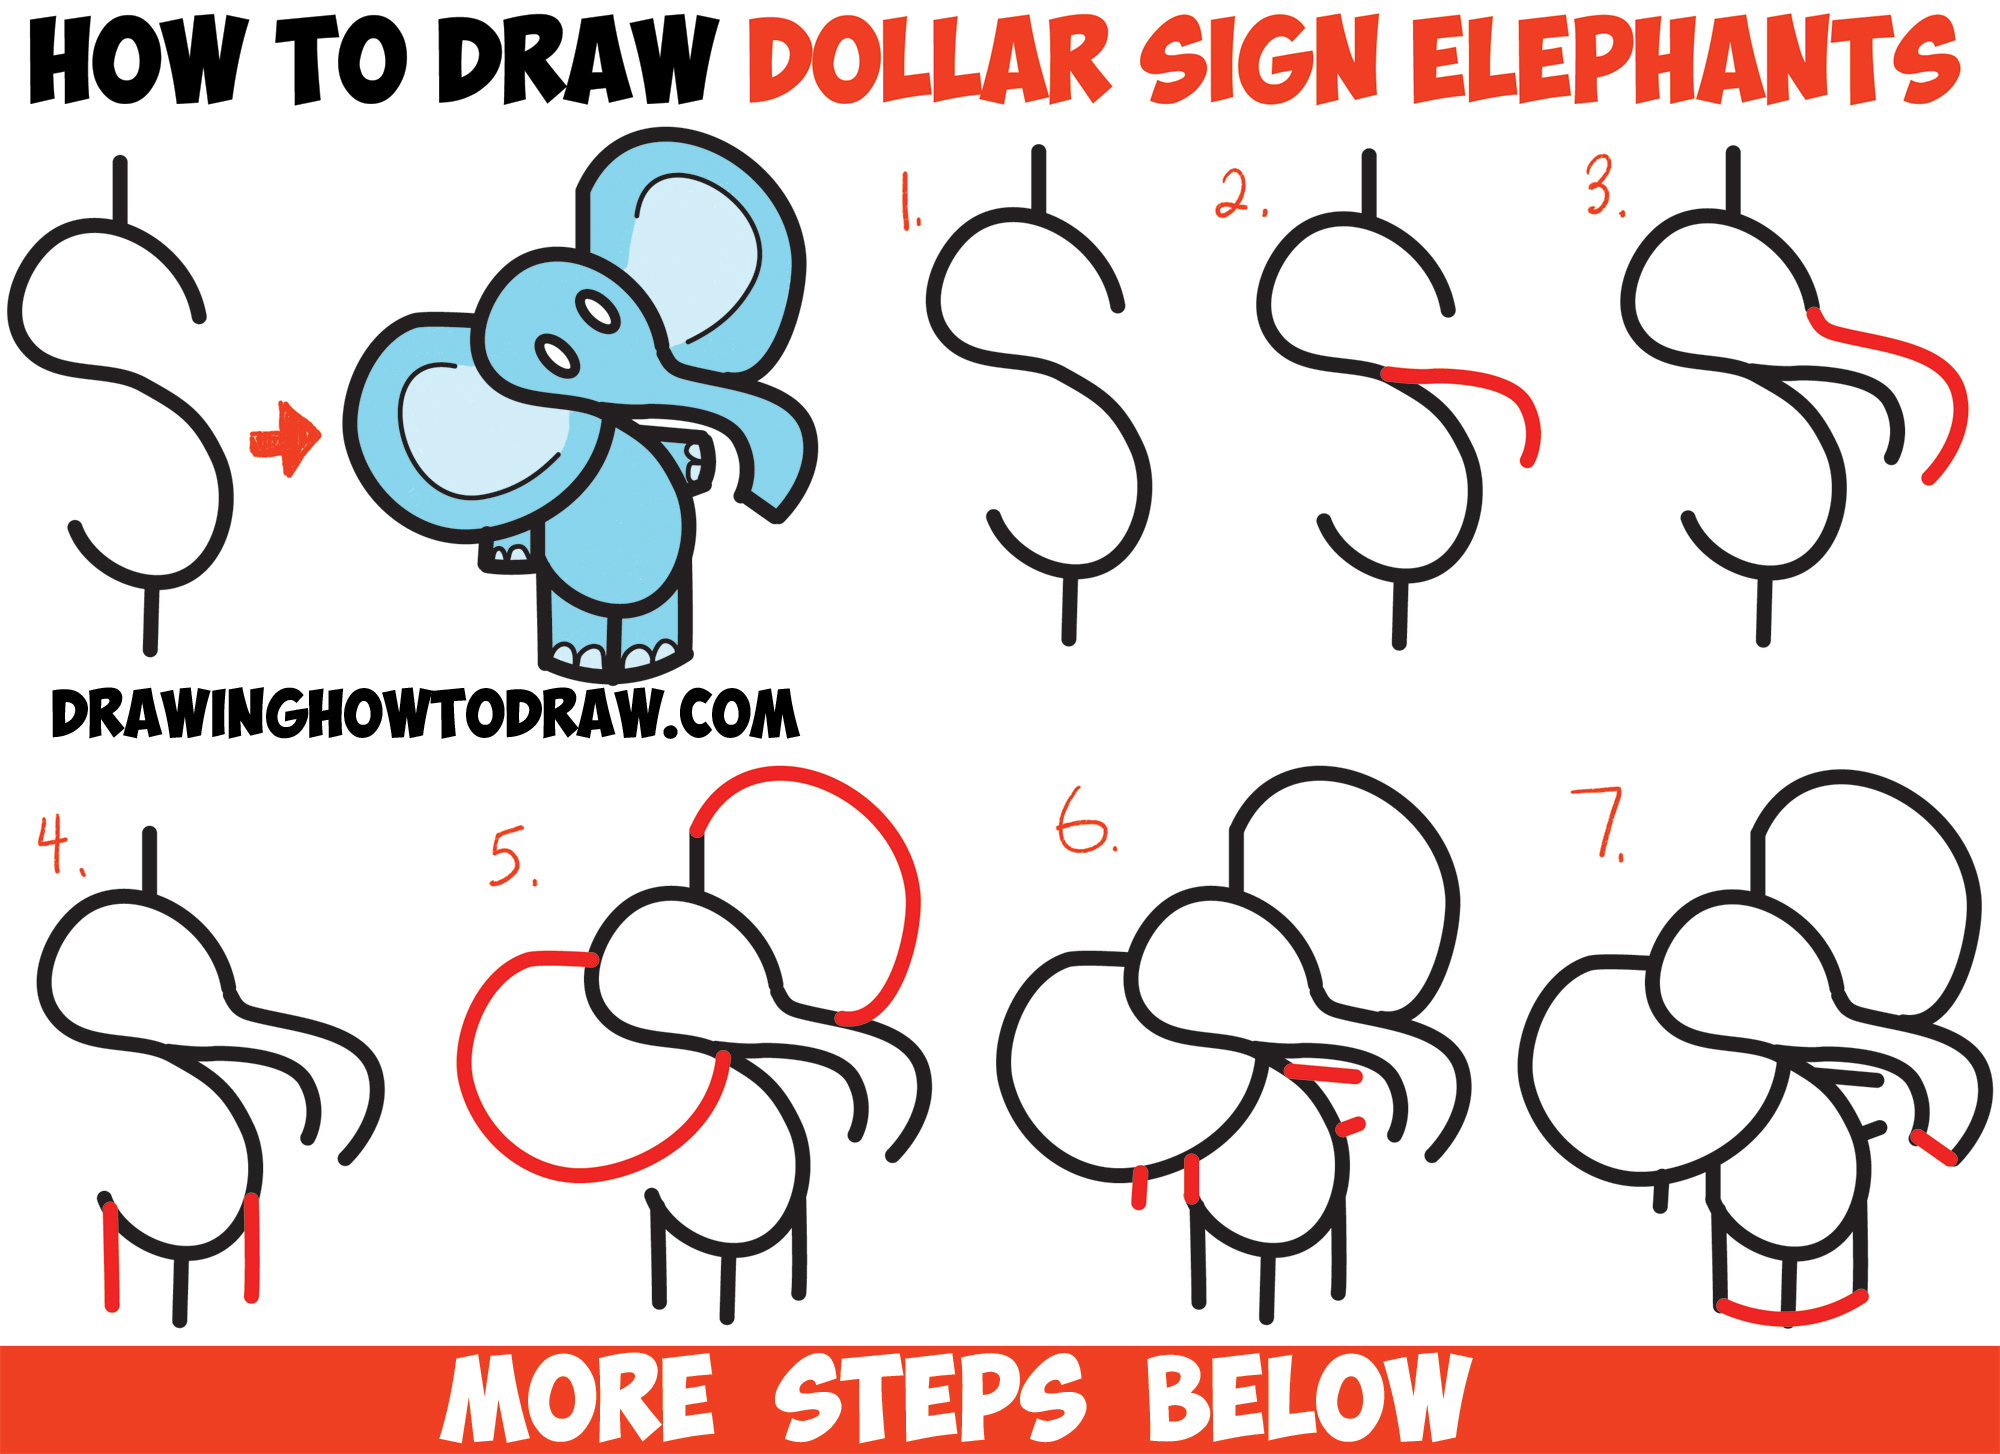 How to Draw Cartoon Elephant from the Dollar Sign - Easy Step by Step ...